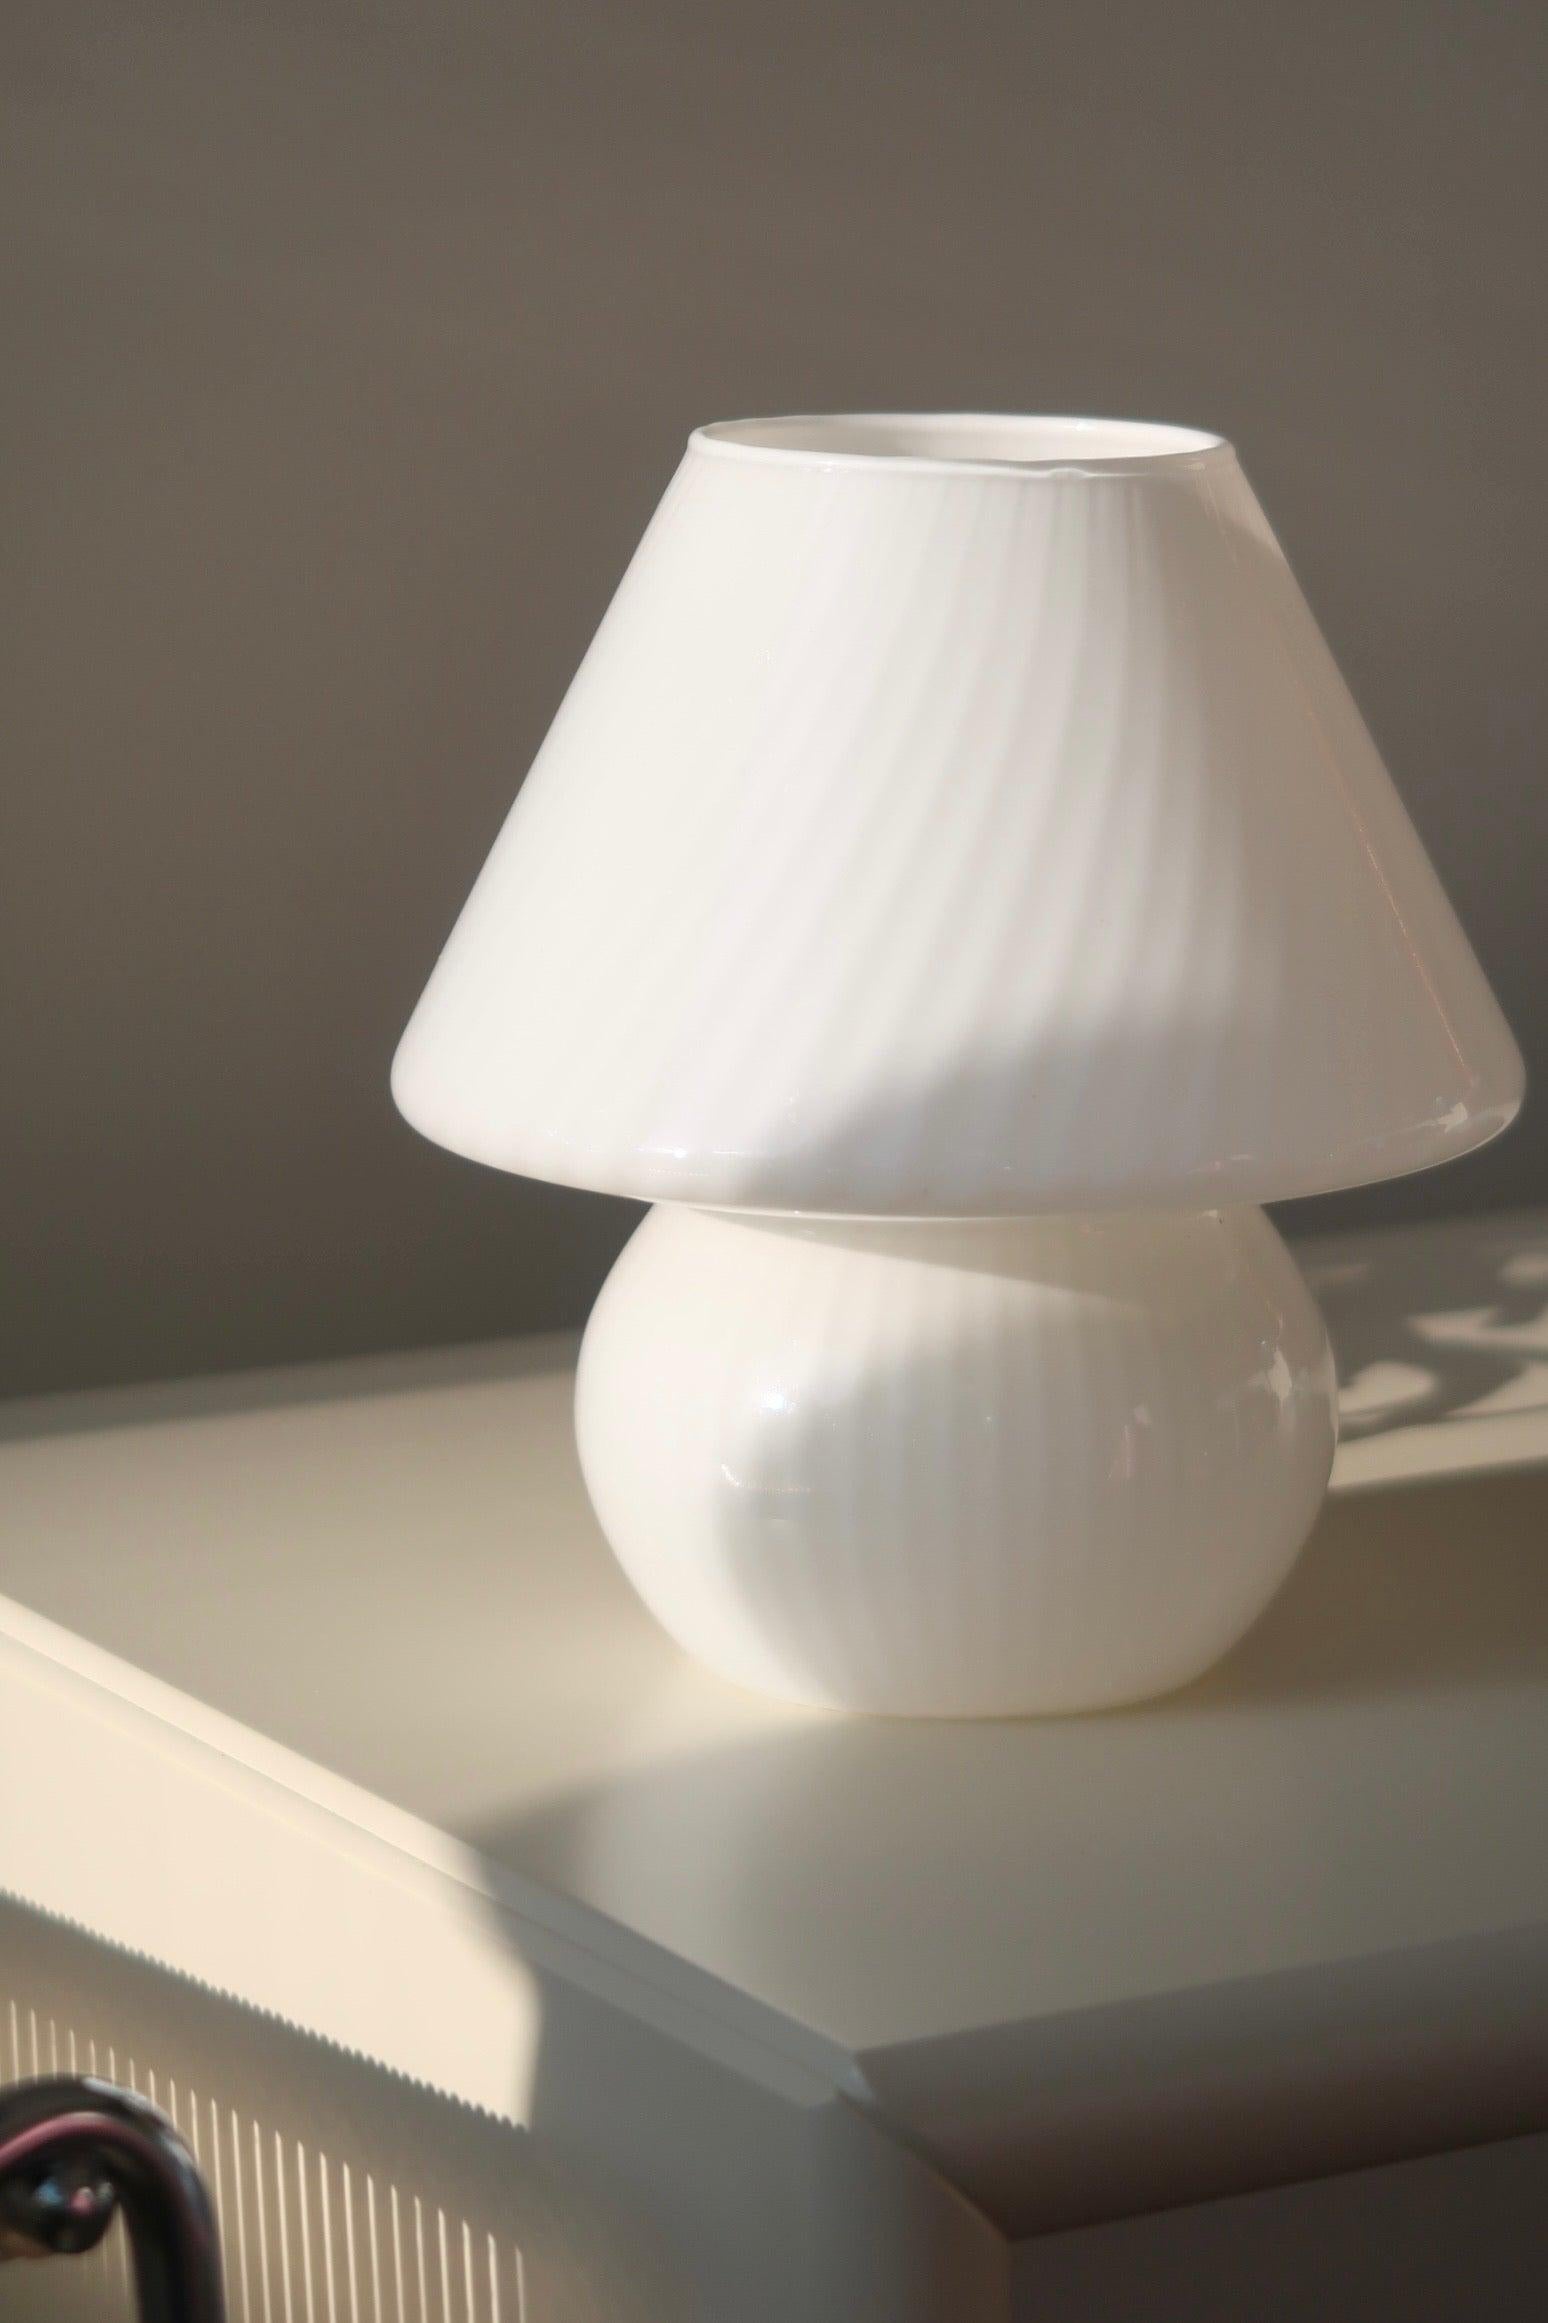 Vintage Murano baby mushroom table lamp. Mouth-blown in white glass with swirl pattern. Handmade in Italy, 1970s, and comes with new white cord. Measures: H:18.5cm D:17cm.